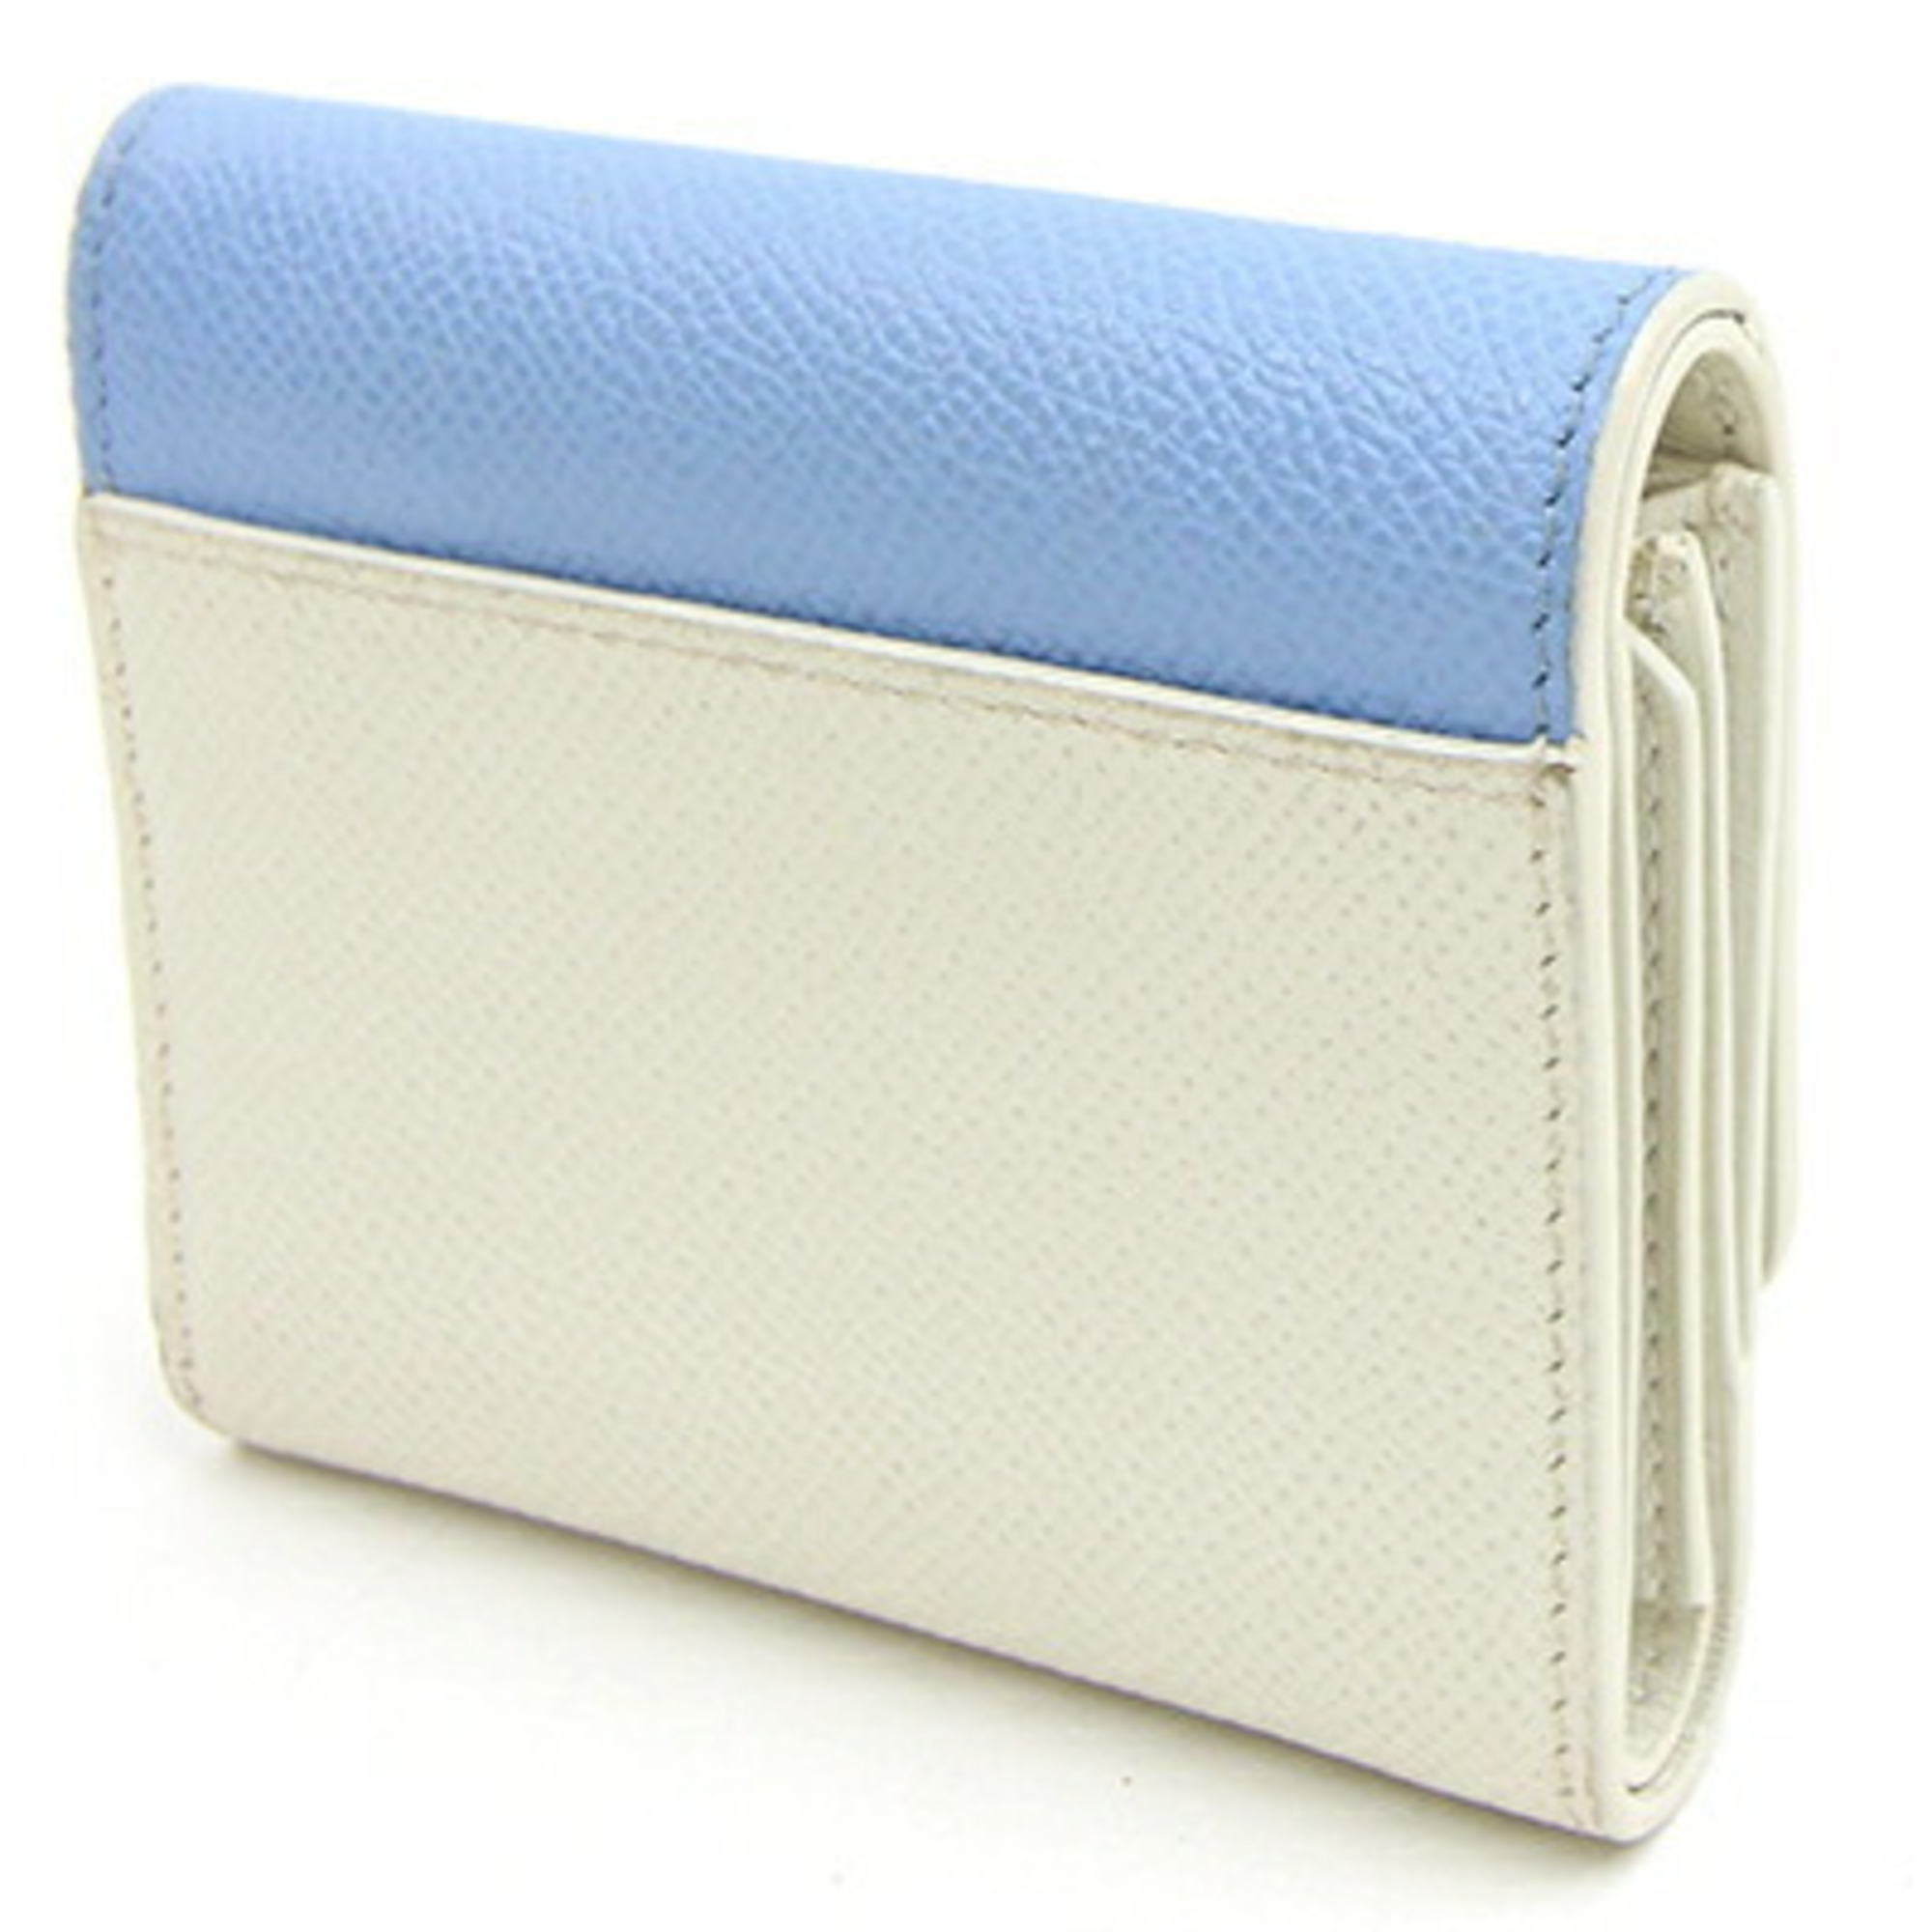 Christian Dior Dior Tri-fold Wallet Lotus S20570BAE Light Blue White Leather Compact CD Bicolor Women's DIOR